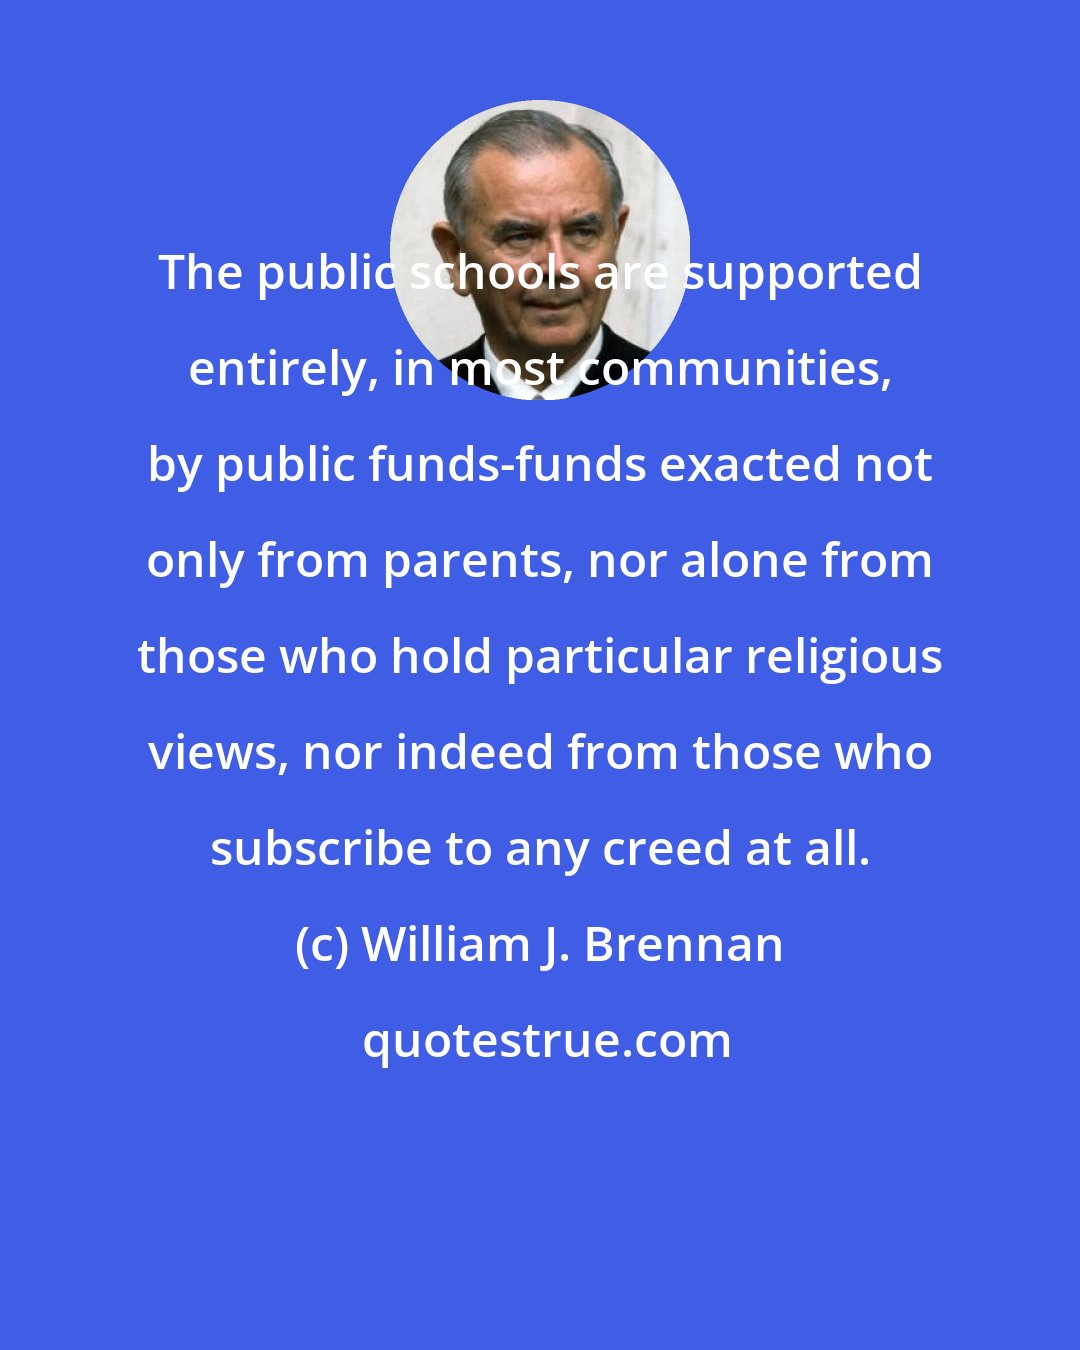 William J. Brennan: The public schools are supported entirely, in most communities, by public funds-funds exacted not only from parents, nor alone from those who hold particular religious views, nor indeed from those who subscribe to any creed at all.